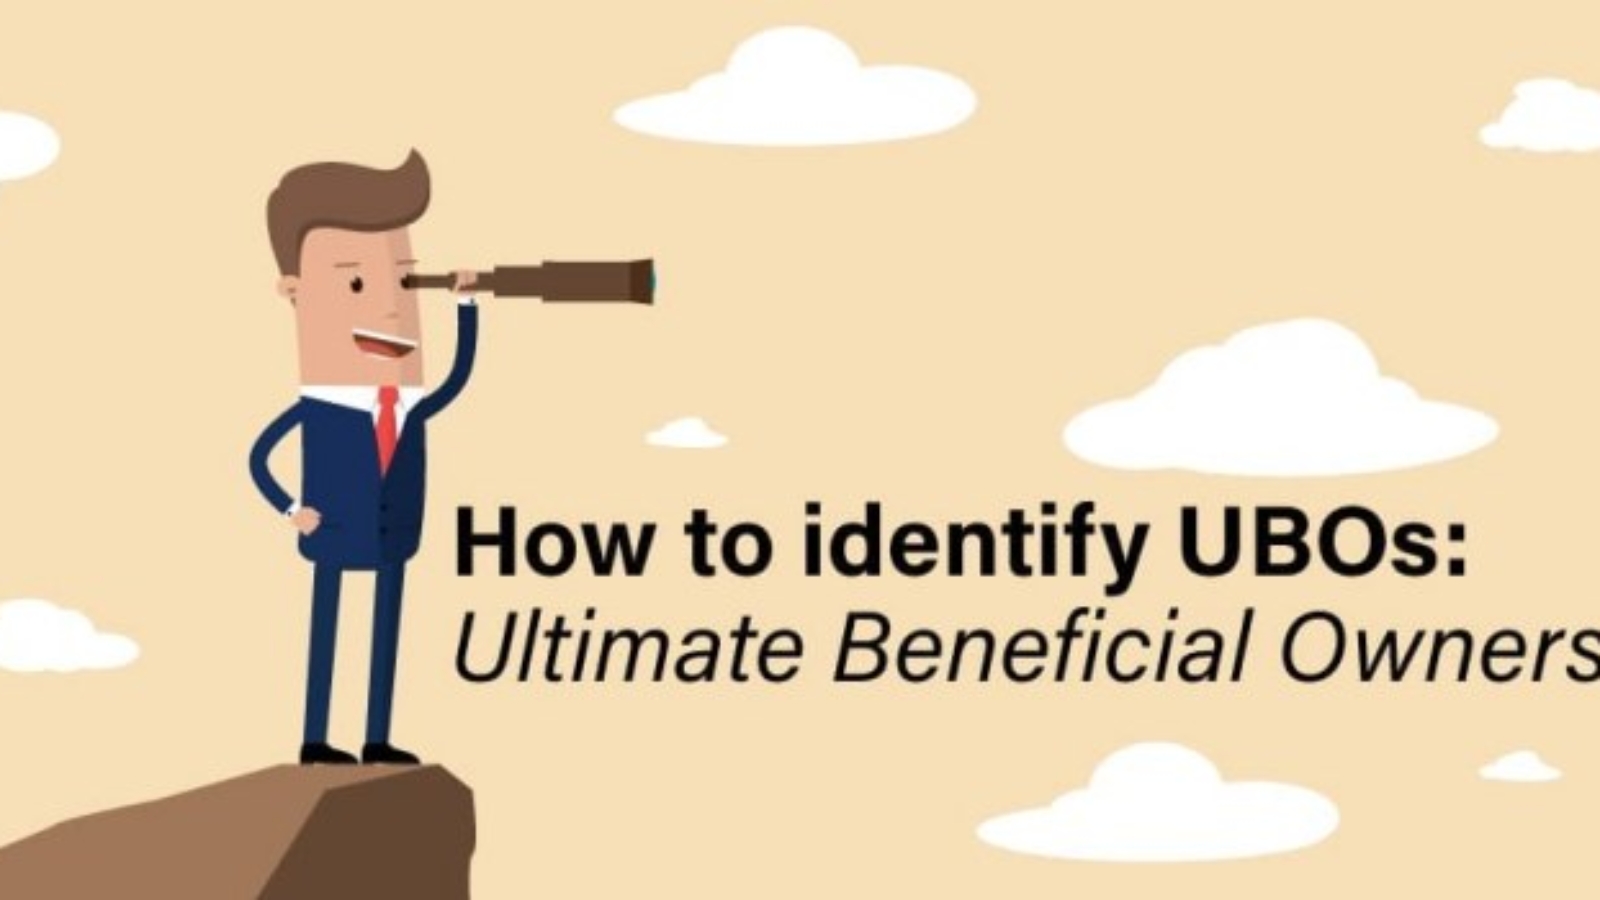 identify the ultimate beneficial owners